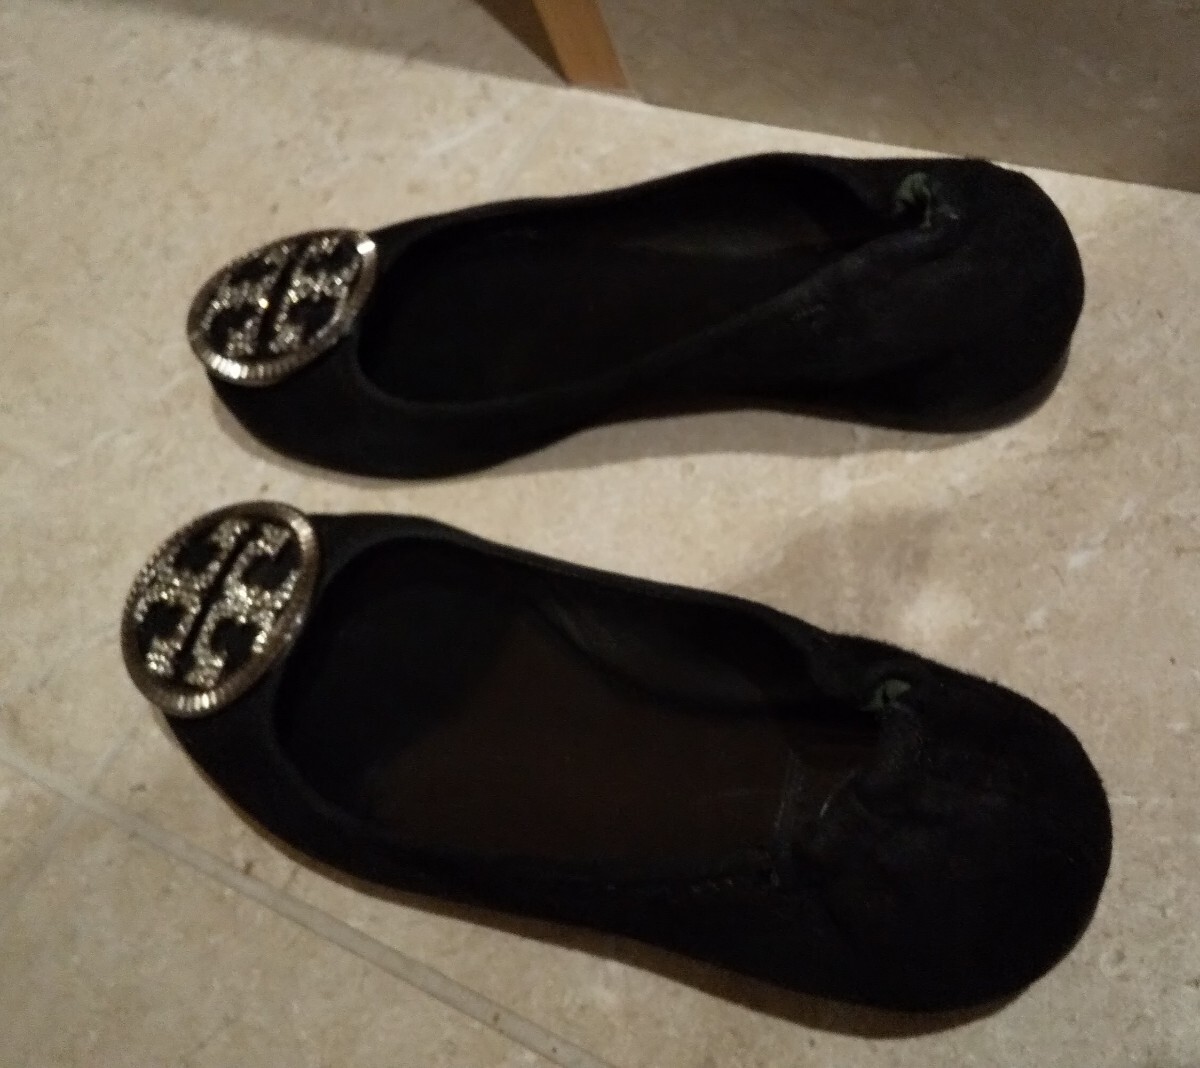 Tory Burch Tory Burch black pumps 5 half M size approximately 22 centimeter beautiful goods complete sale goods regular price 98000 jpy Ise city . Shinjuku shop .. buy 